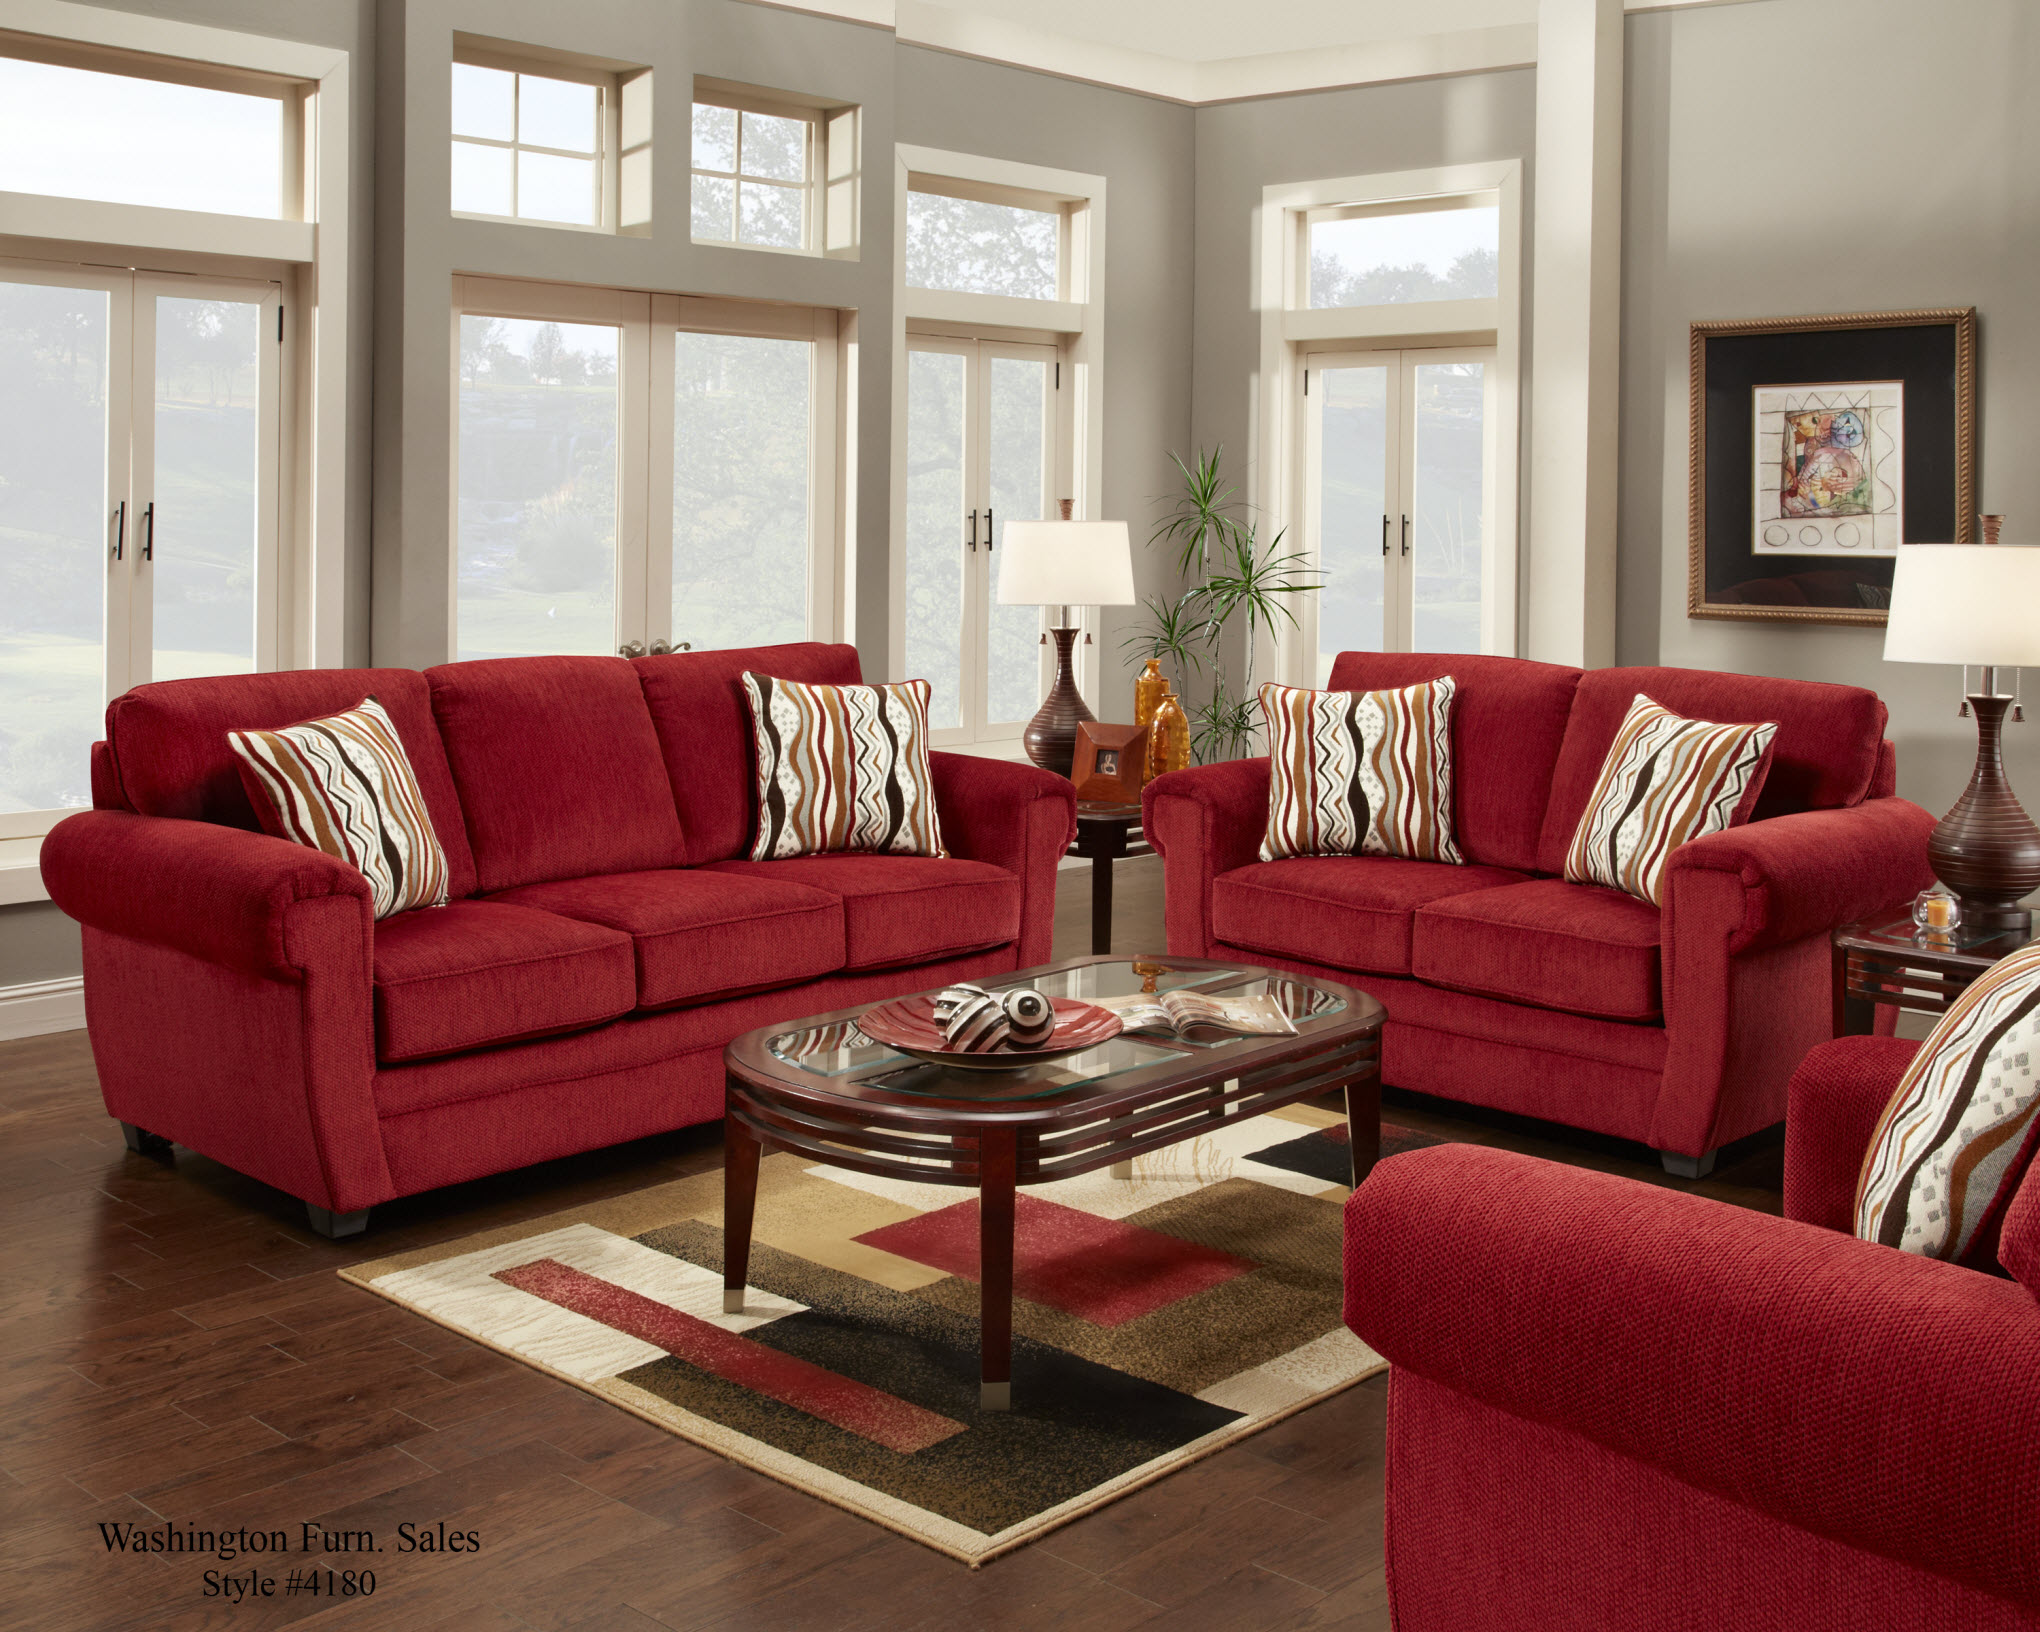 living room design red couch photo - 7